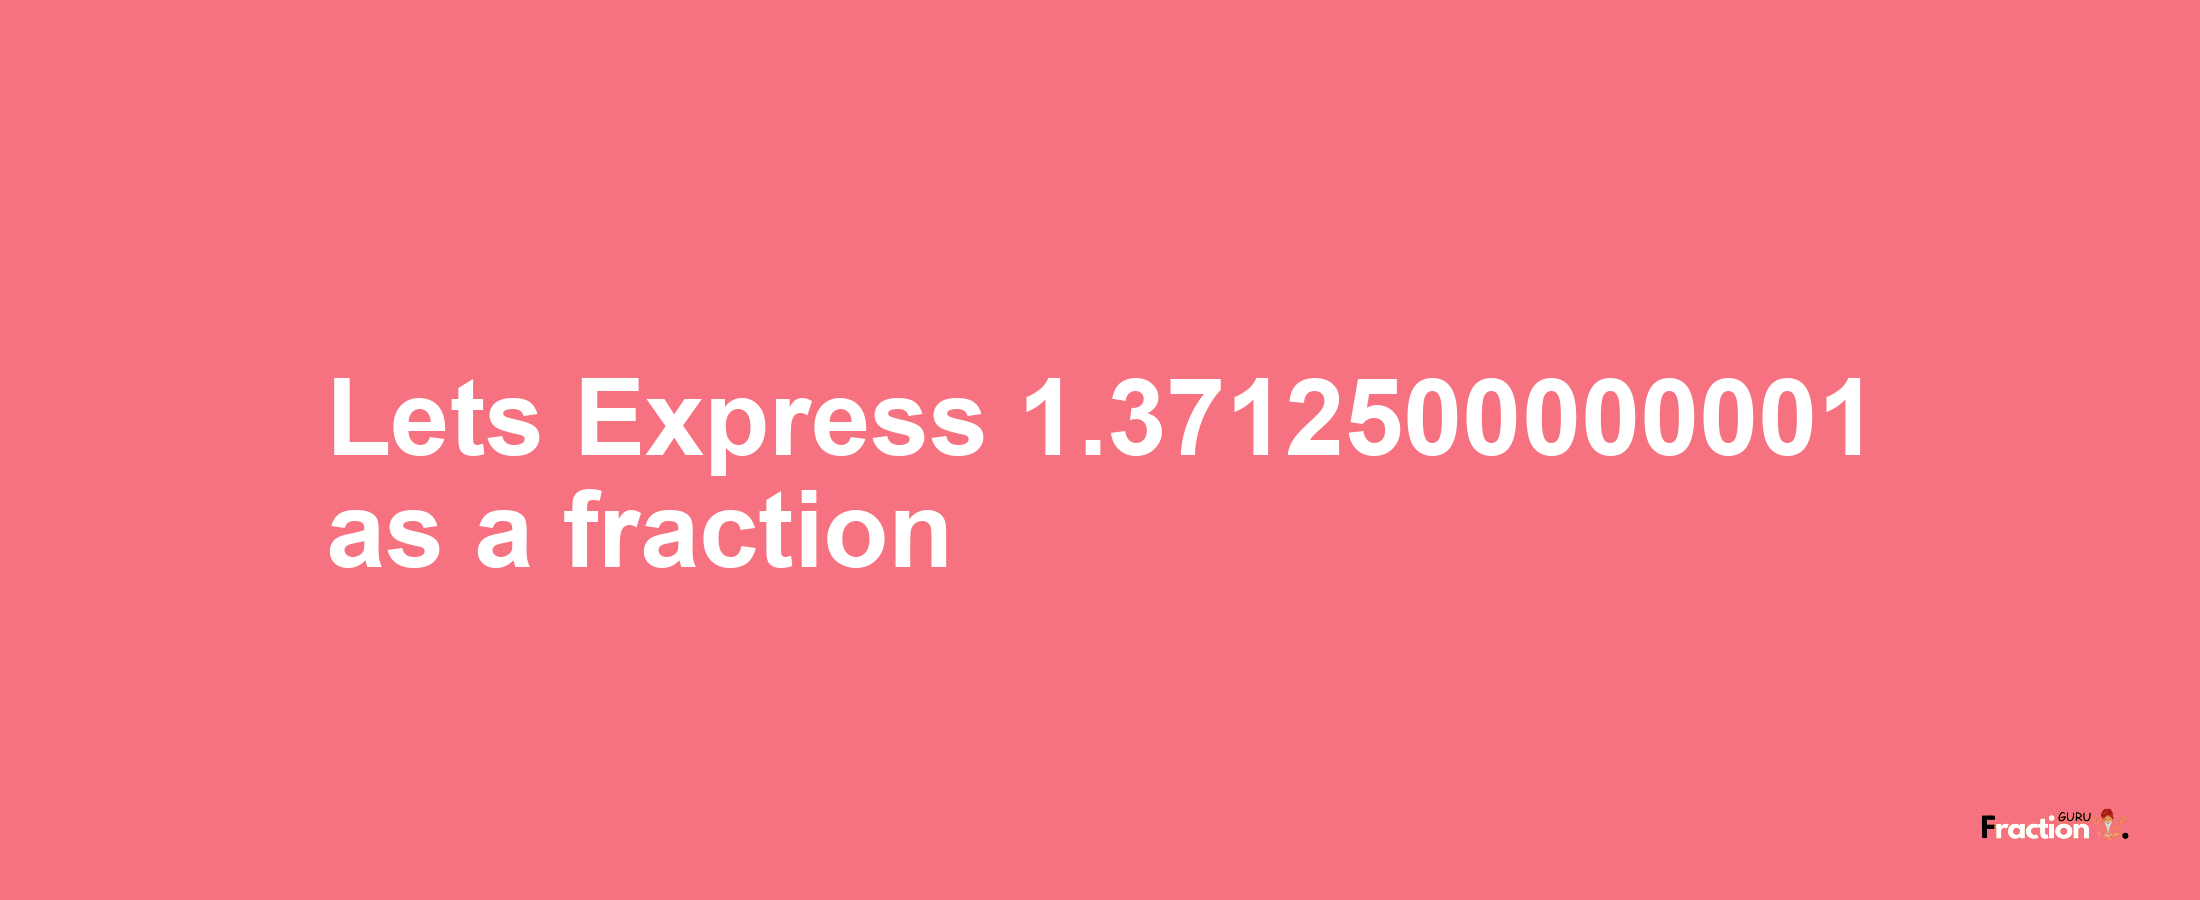 Lets Express 1.3712500000001 as afraction